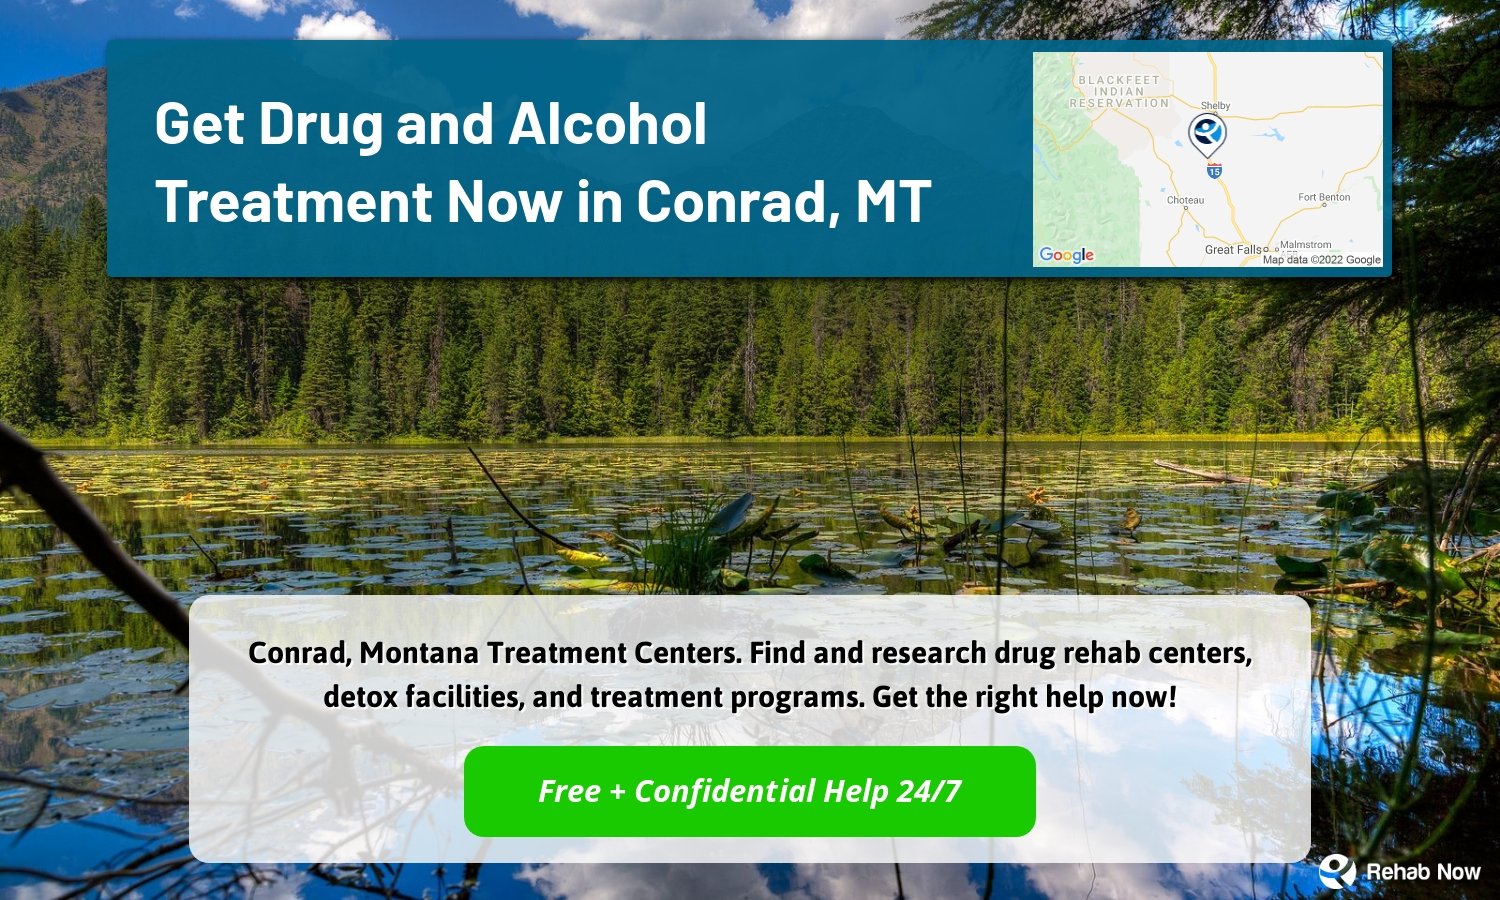 Conrad, Montana Treatment Centers. Find and research drug rehab centers, detox facilities, and treatment programs. Get the right help now!